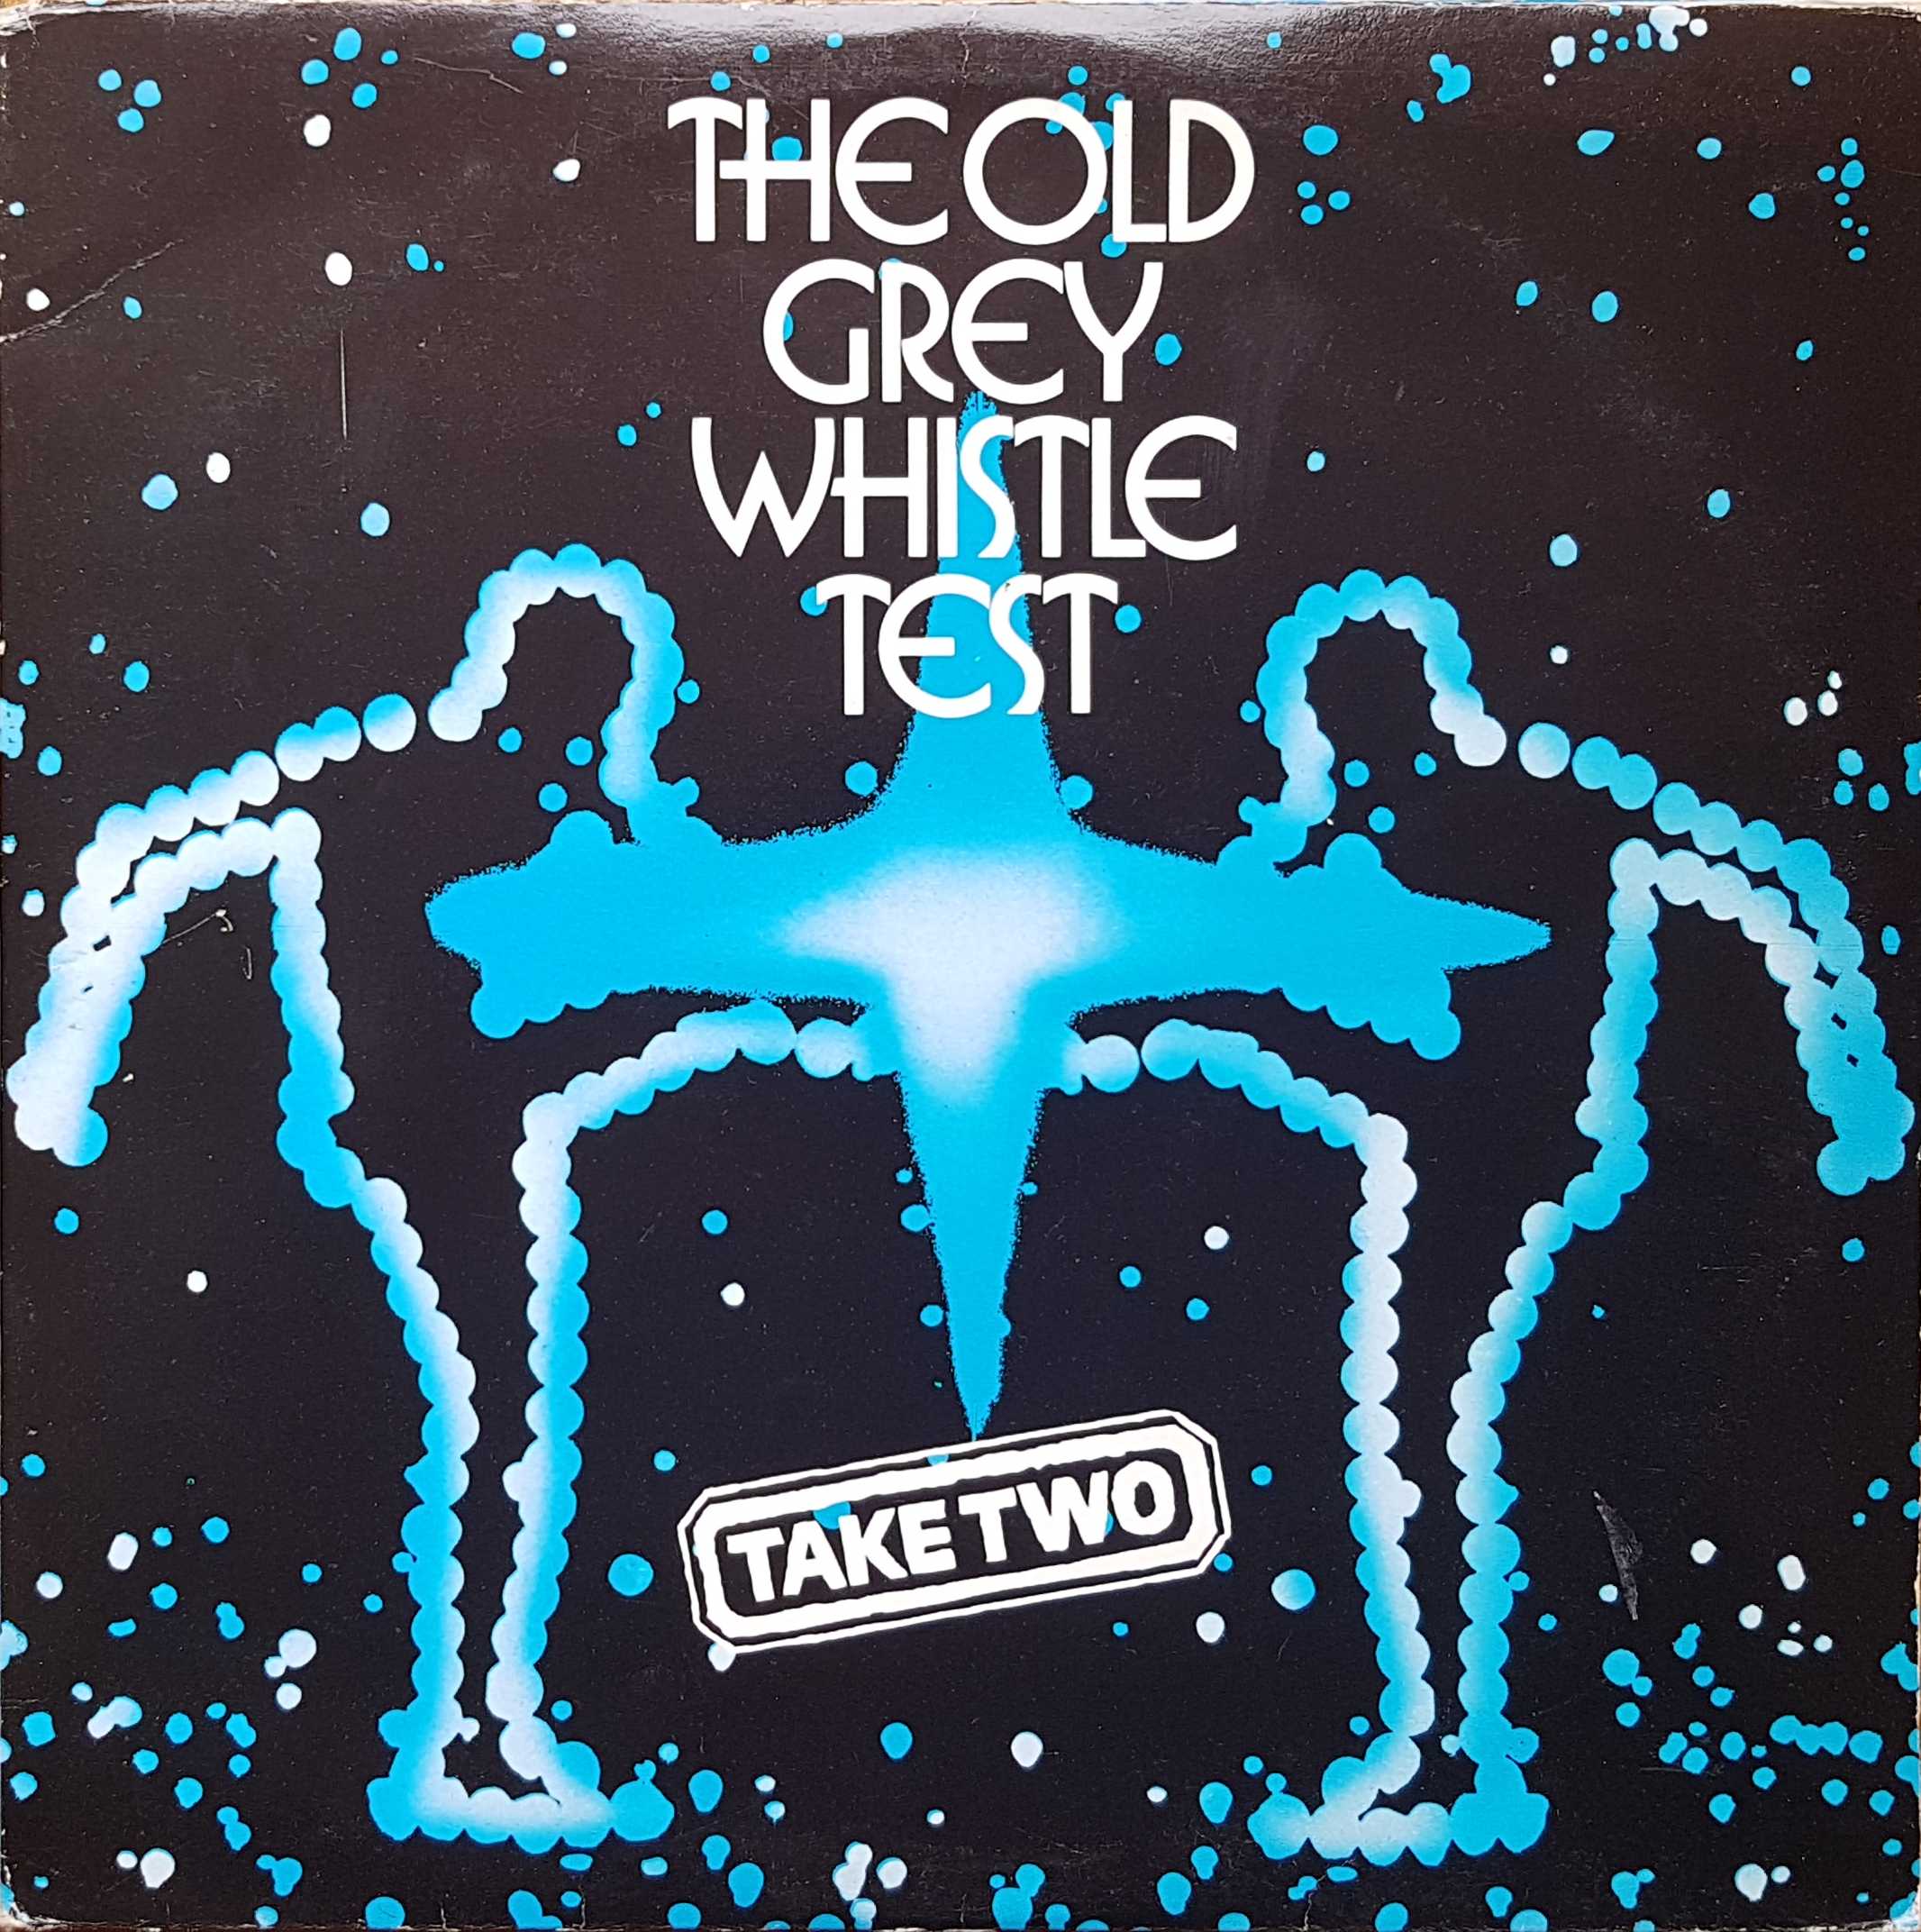 Picture of BEDP 001 The Old Grey Whistle Test - Take 2 by artist Various from the BBC albums - Records and Tapes library